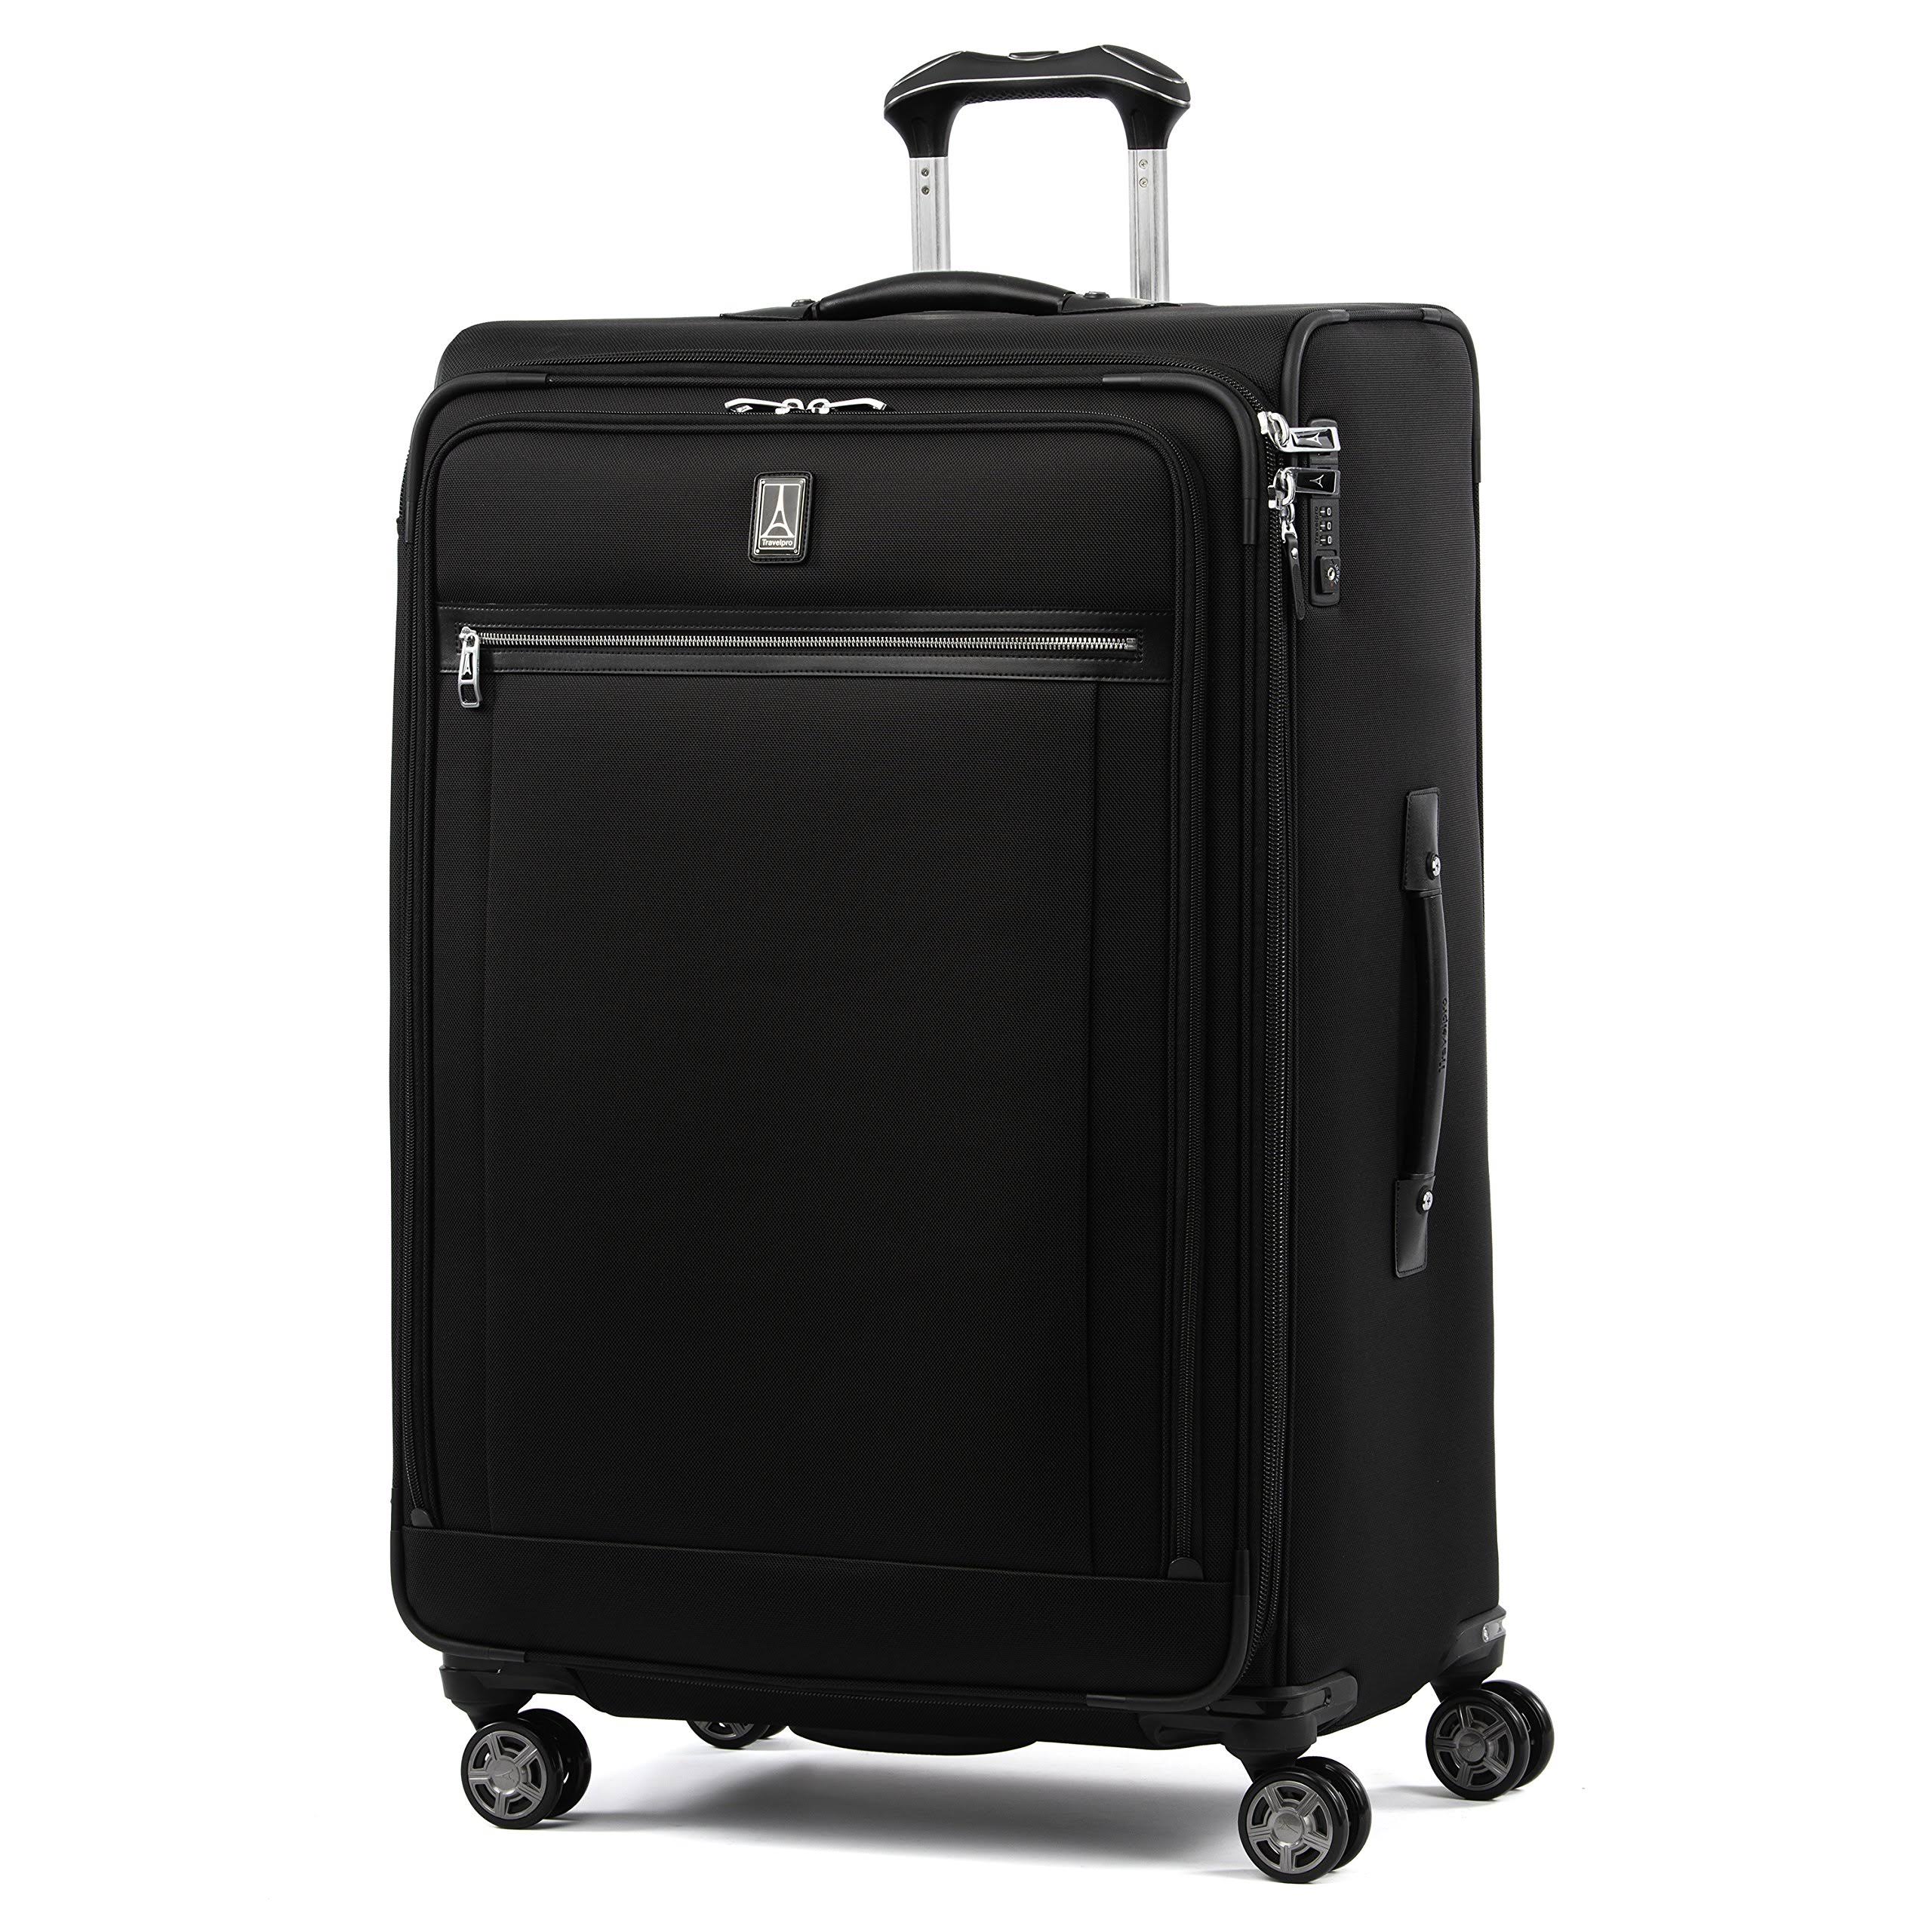 Travelpro Platinum Elite Expandable Spinner Suitcase - 29in